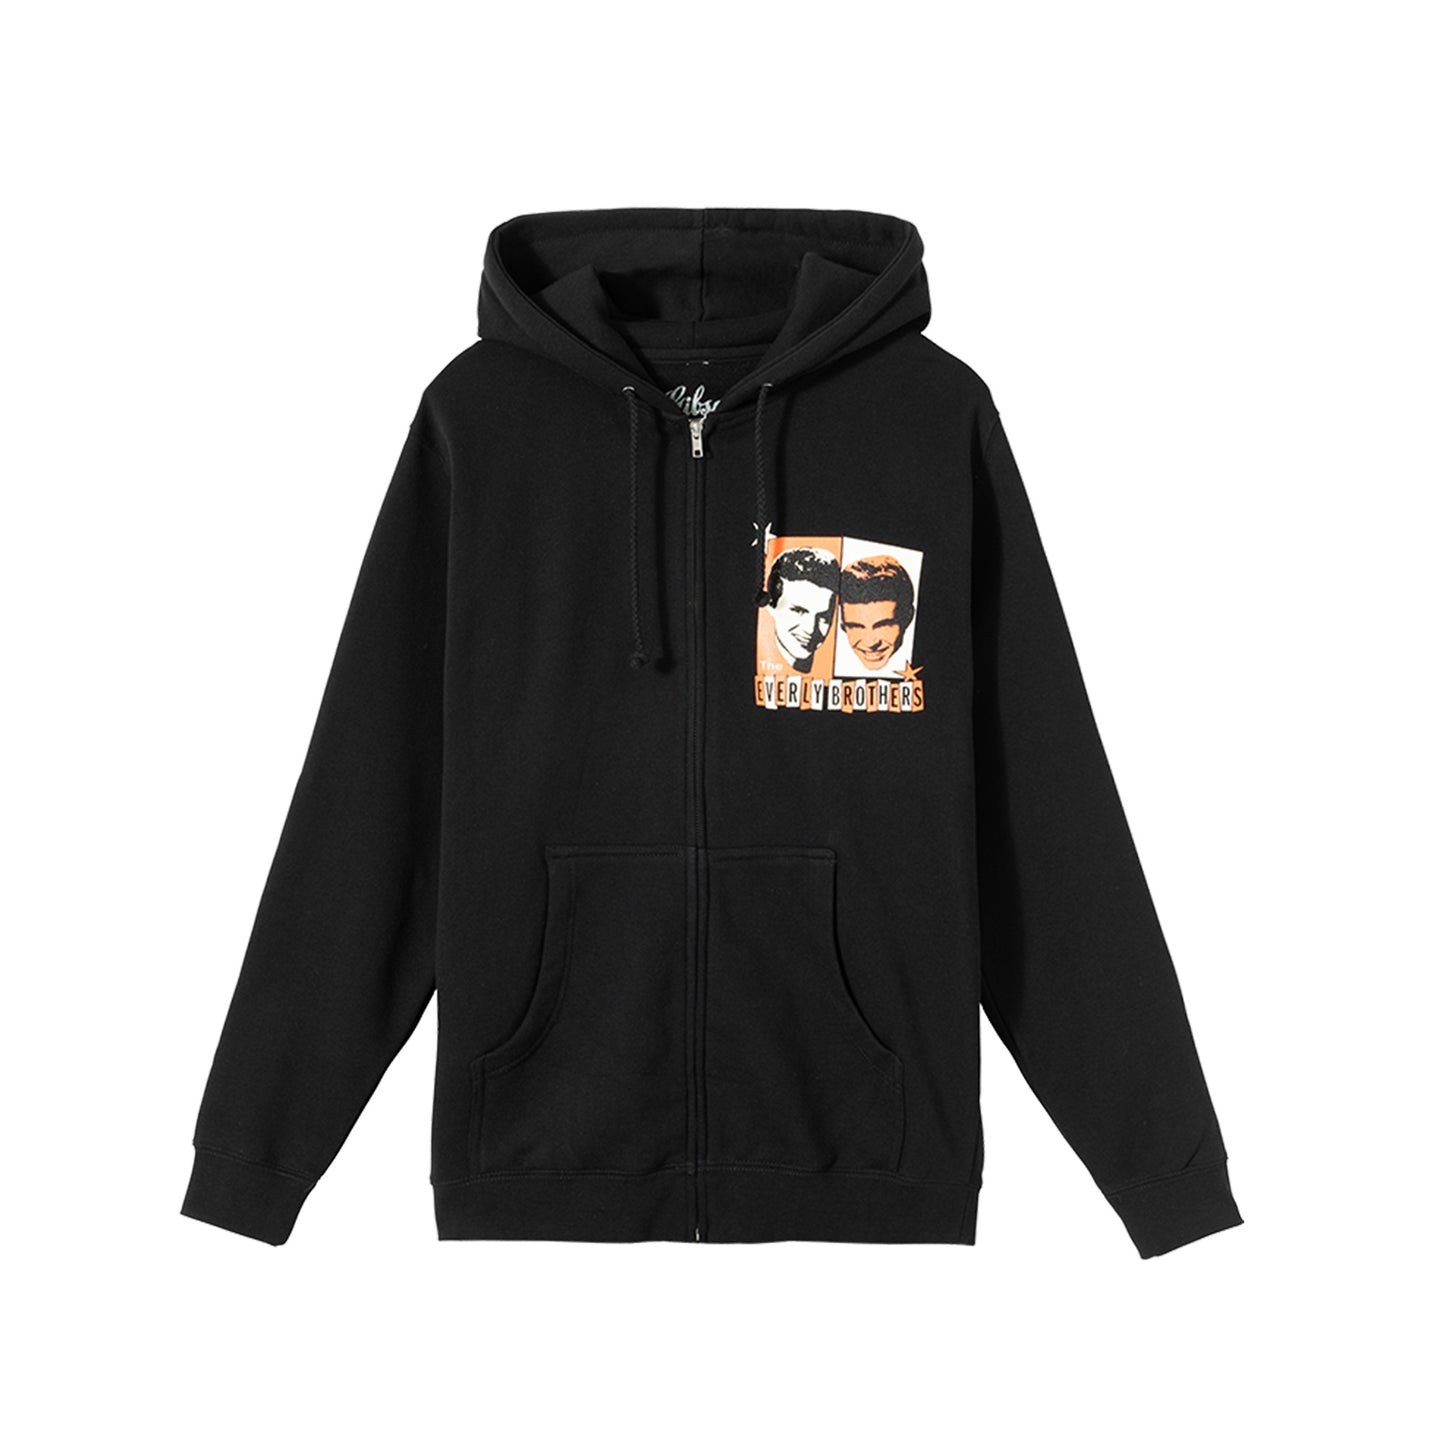 Gibson x Everly Brothers Full zip Hoodie